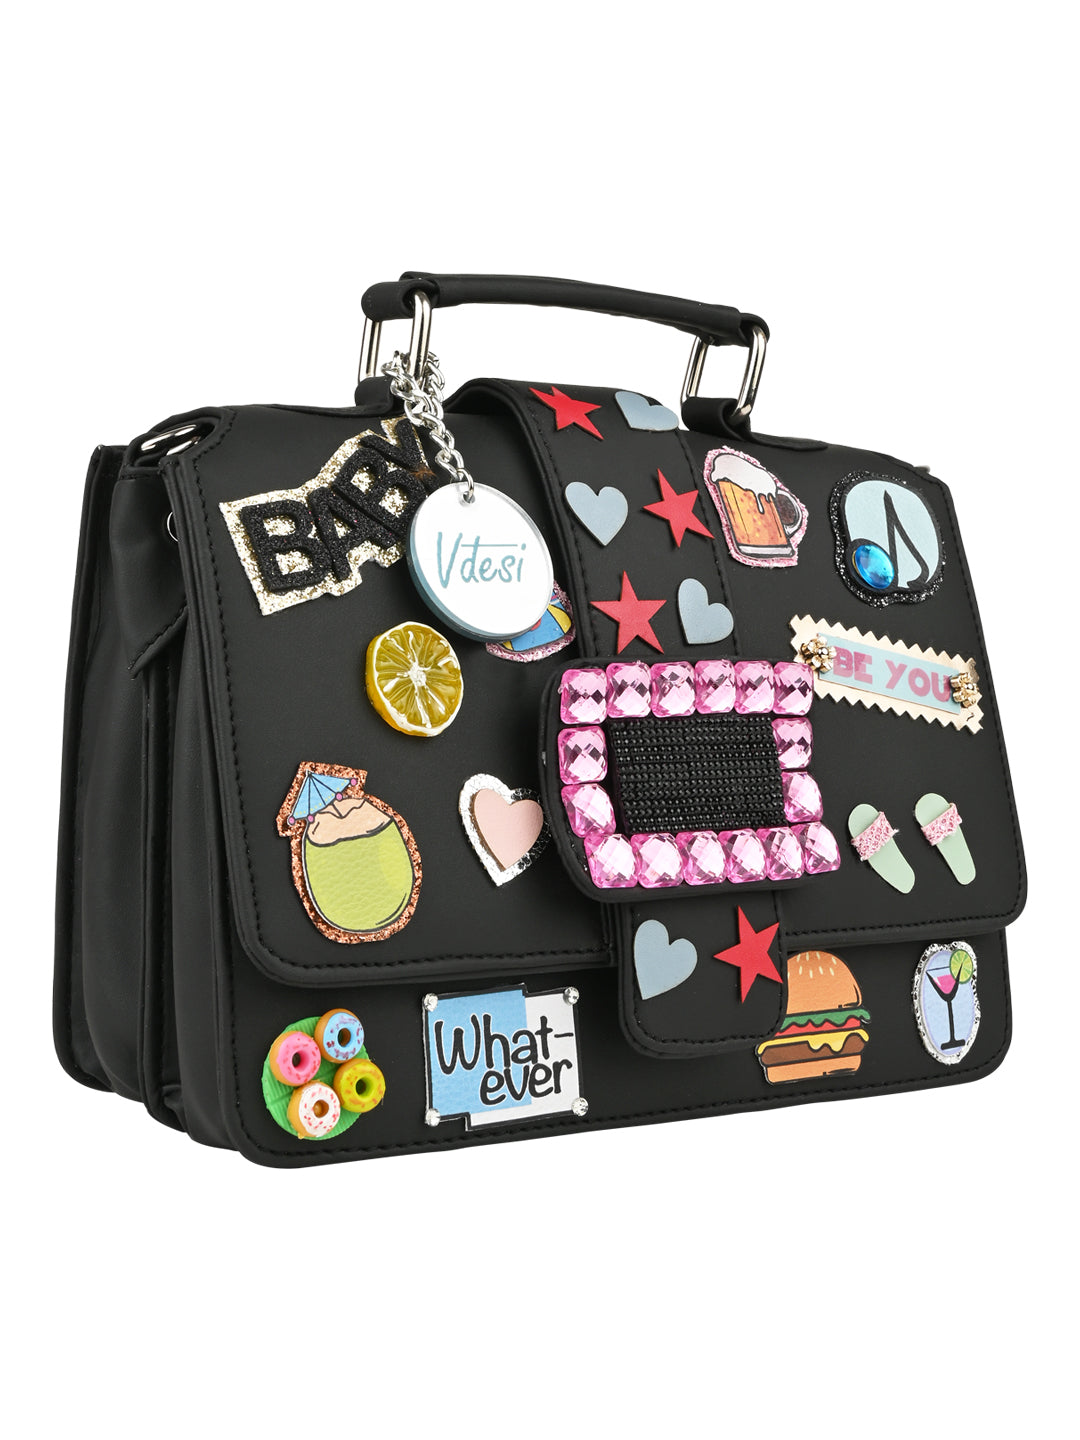 A Vdesi Black pop badges belt sling bag made of PU material with compartments, adorned with a collection of stickers.